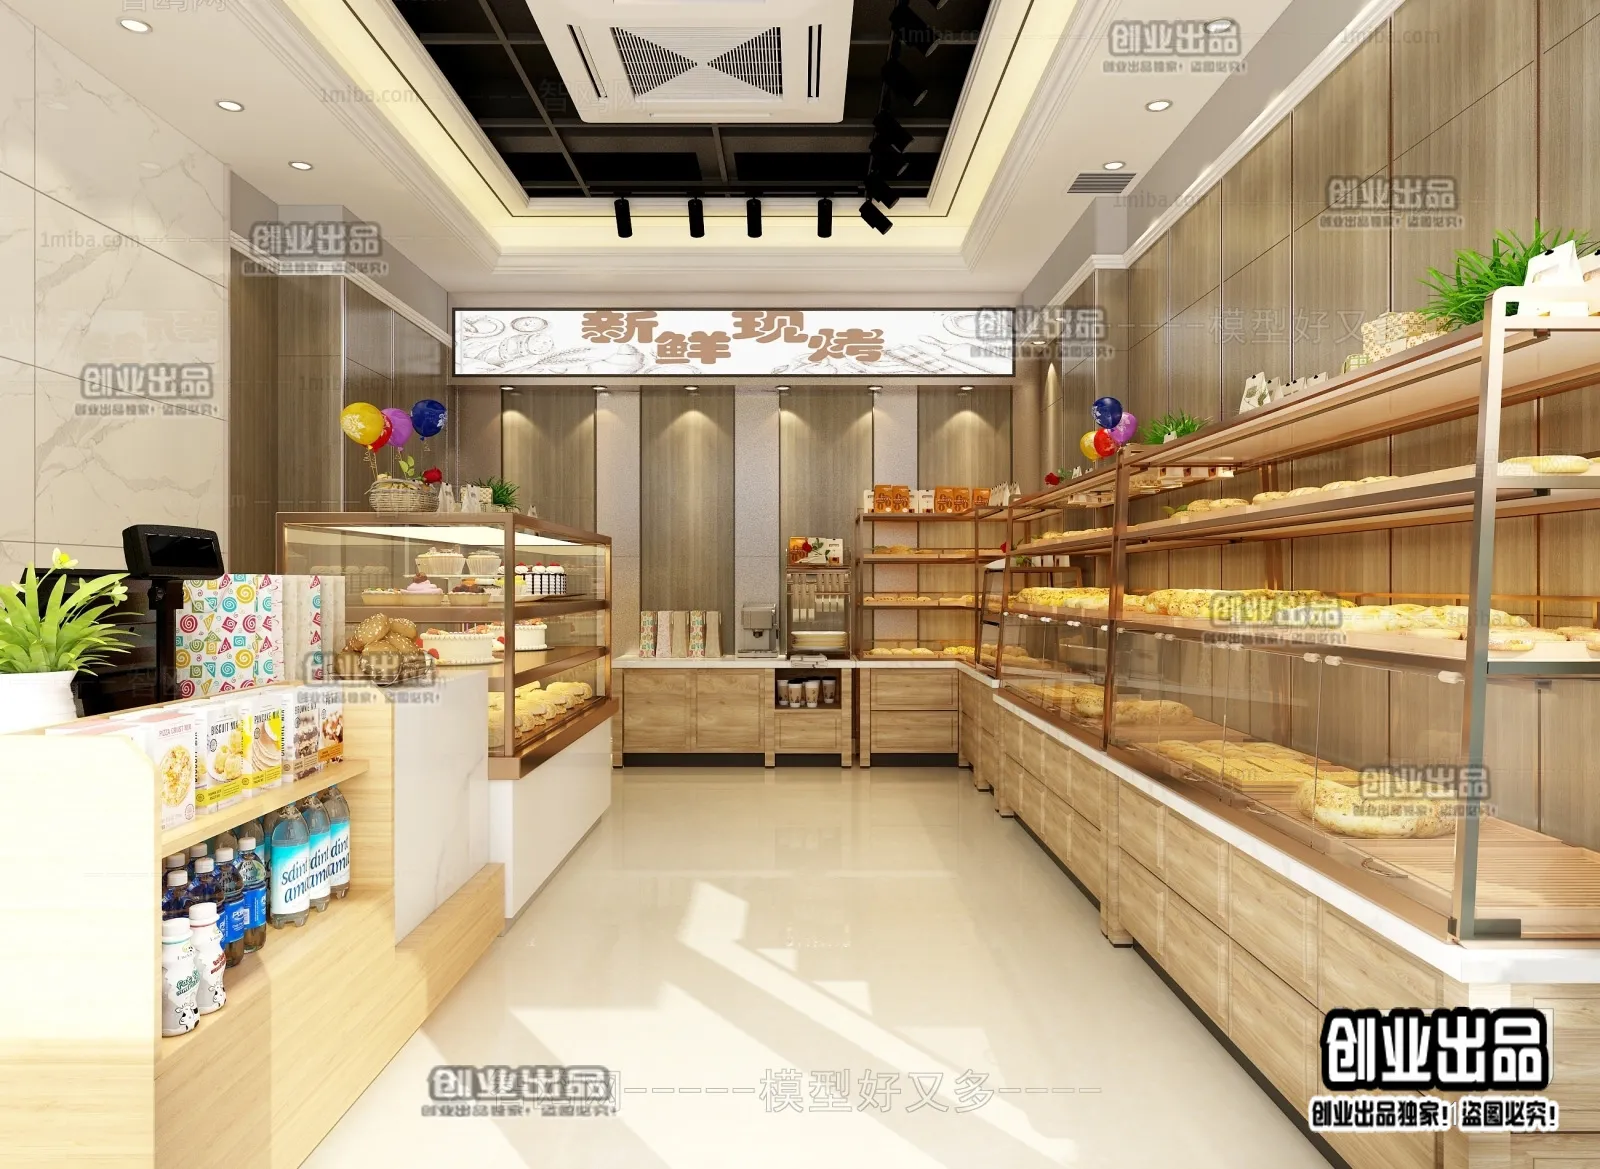 FASTFOOD STORE – 3D SCENES – 0136